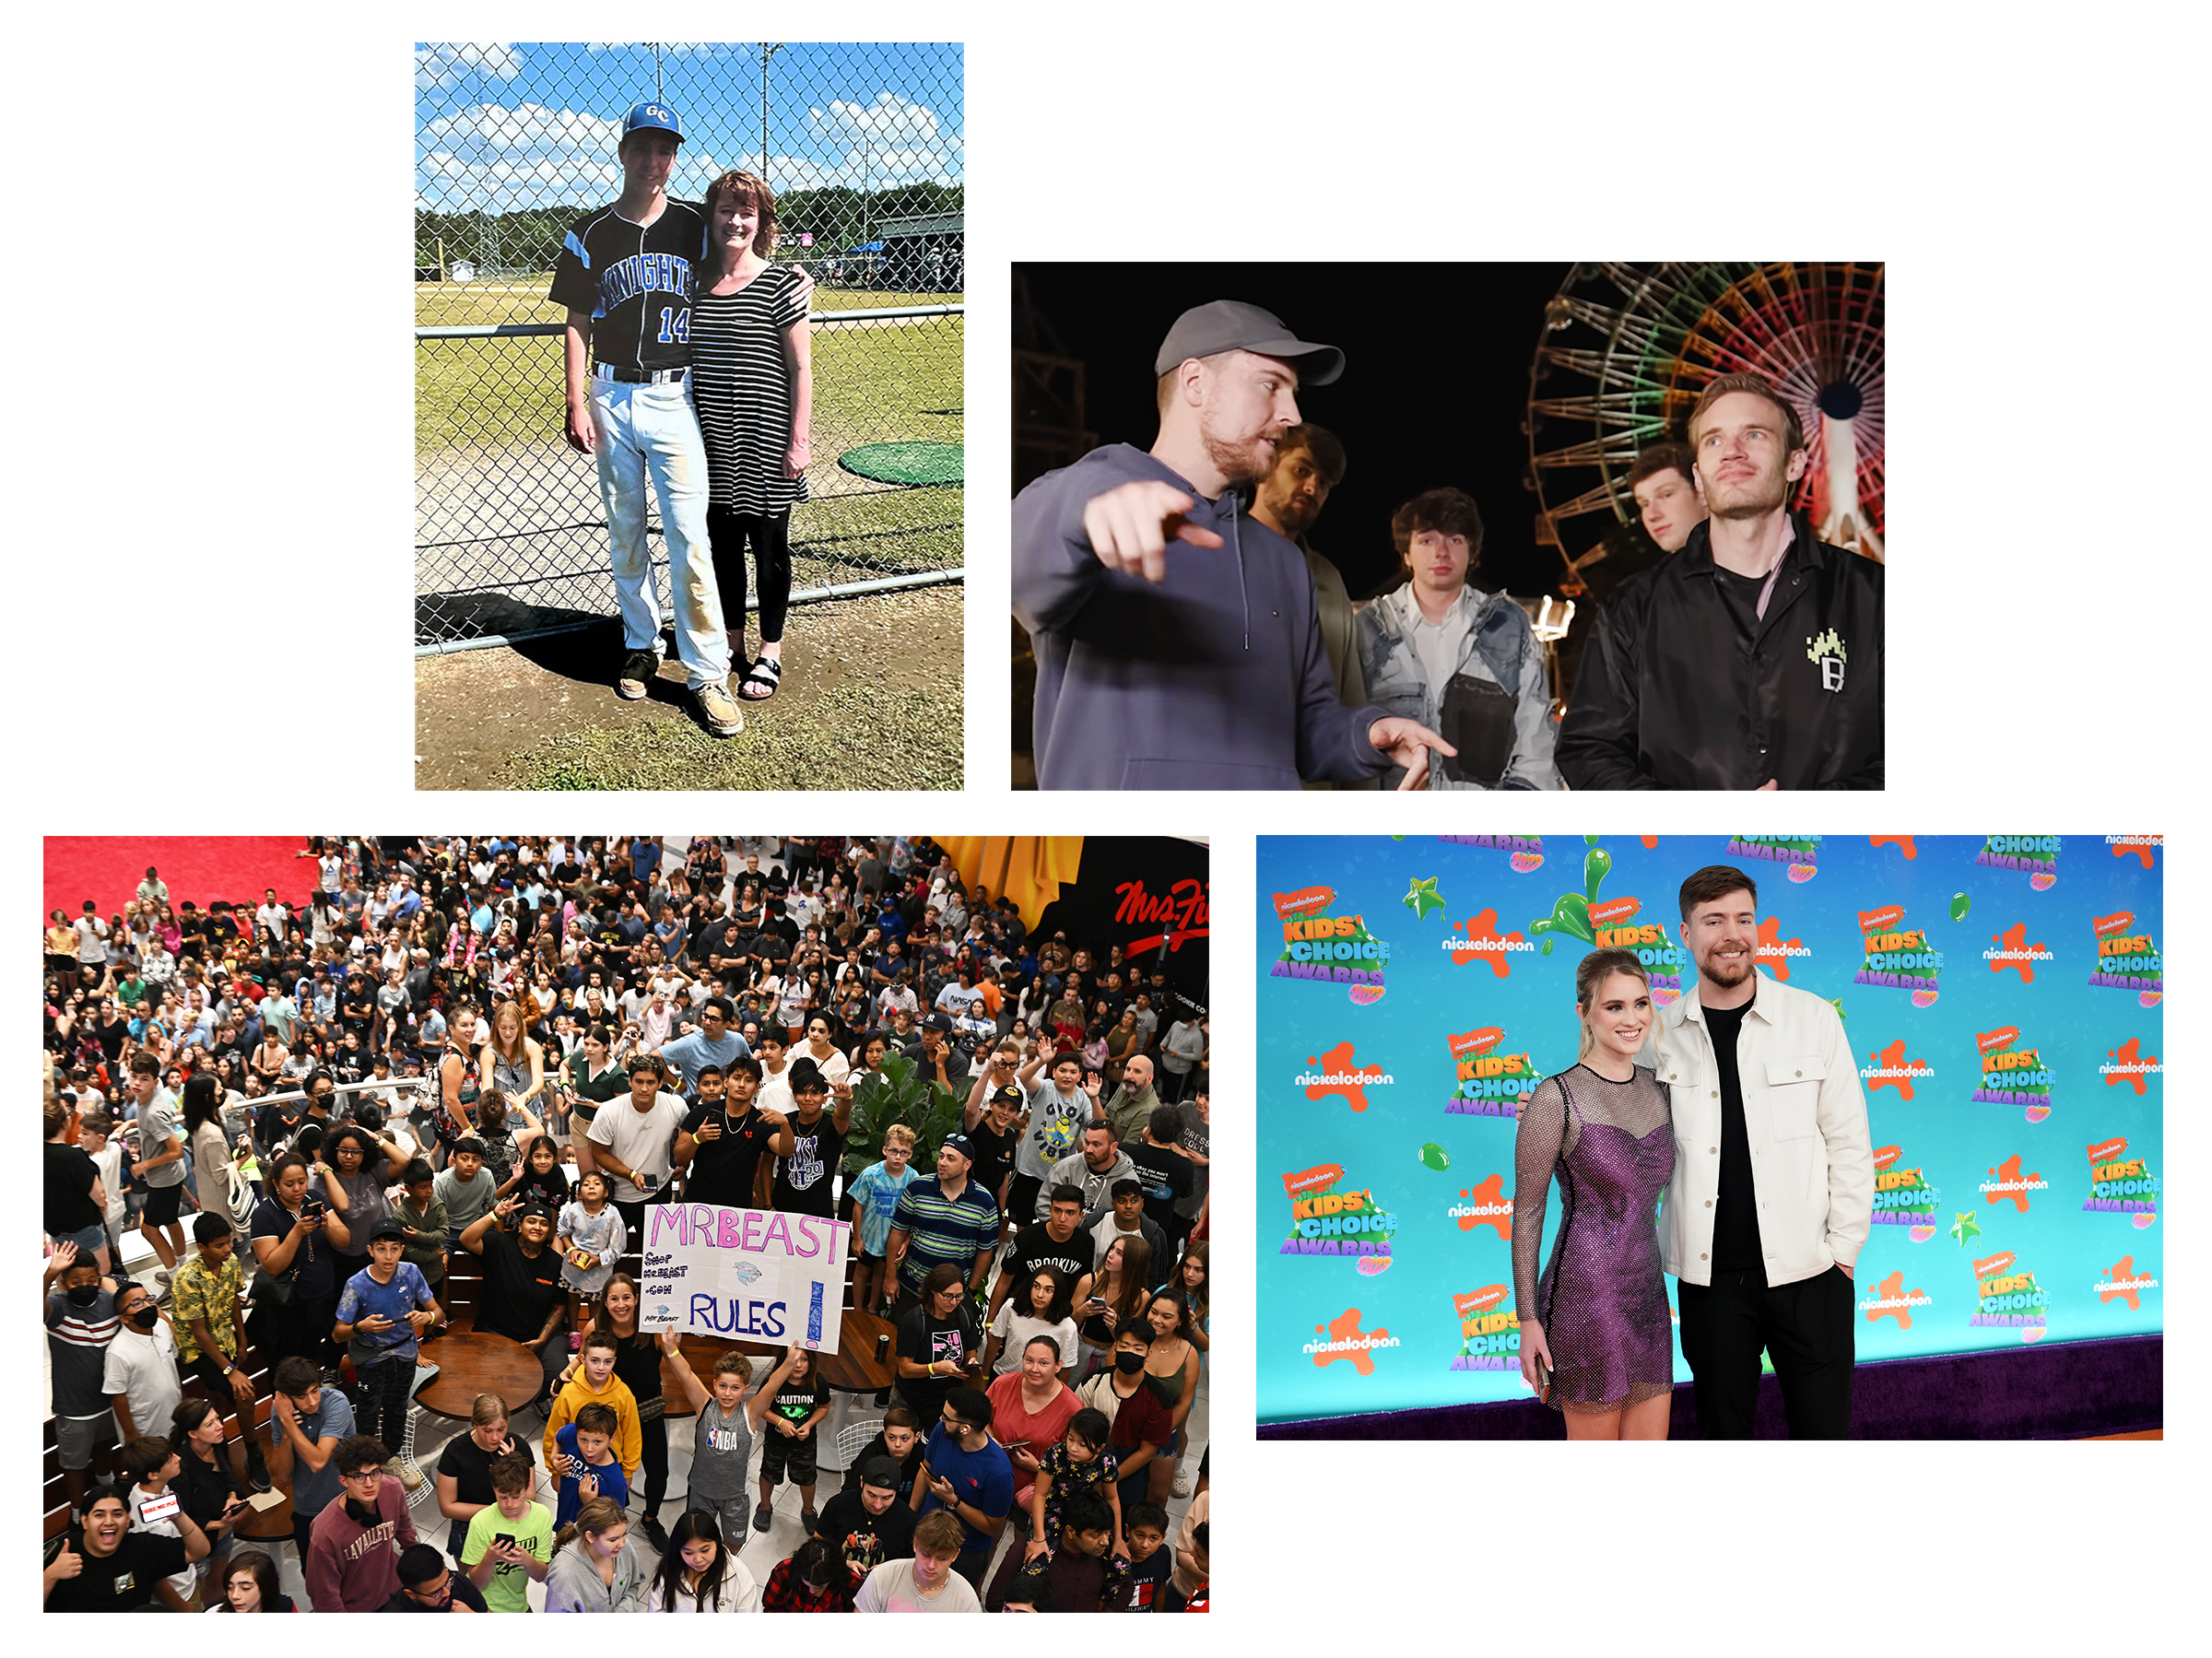 From left, clockwise: Donaldson and his mom in 2016, the year before he gave her $100,000 to pay her mortgage; Donaldson, with his posse, rented out a Japanese theme park to meet Youtuber Felix Kjellberg, right, who goes by PewDiePie; Donaldson credits girlfriend Thea Booysen with helping him work harder; Crowds swarm the opening of the MrBeast Burger Restaurant in New Jersey in September 2022. (Courtesy MrBeast; MrBeast/Youtube; Jeff Kravitz—FilmMagic/Getty Images; Dave Kotinsky—Getty Images for MrBeast Burger)